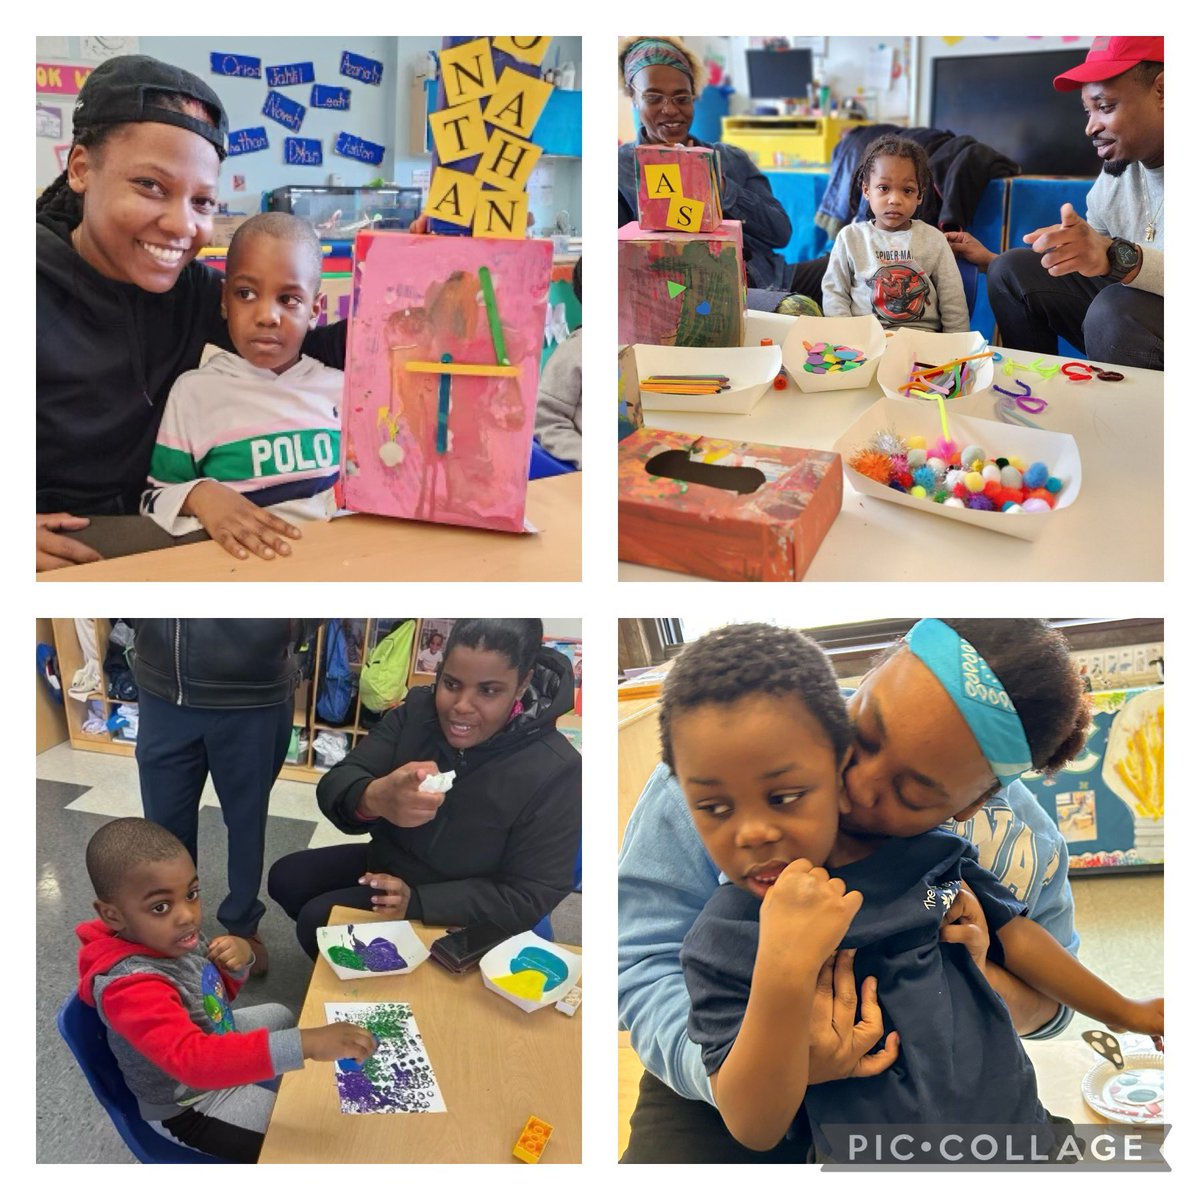 Classes C-91 and C-92 at Joan Snow/ Glenwood enjoyed a wonderful and fun “Family Day”! #Reimaginelearning @Rosaliefav @District22BKNY @DOEChancellor @NYCSchools @Stu_chasabenis @NYCCouncil